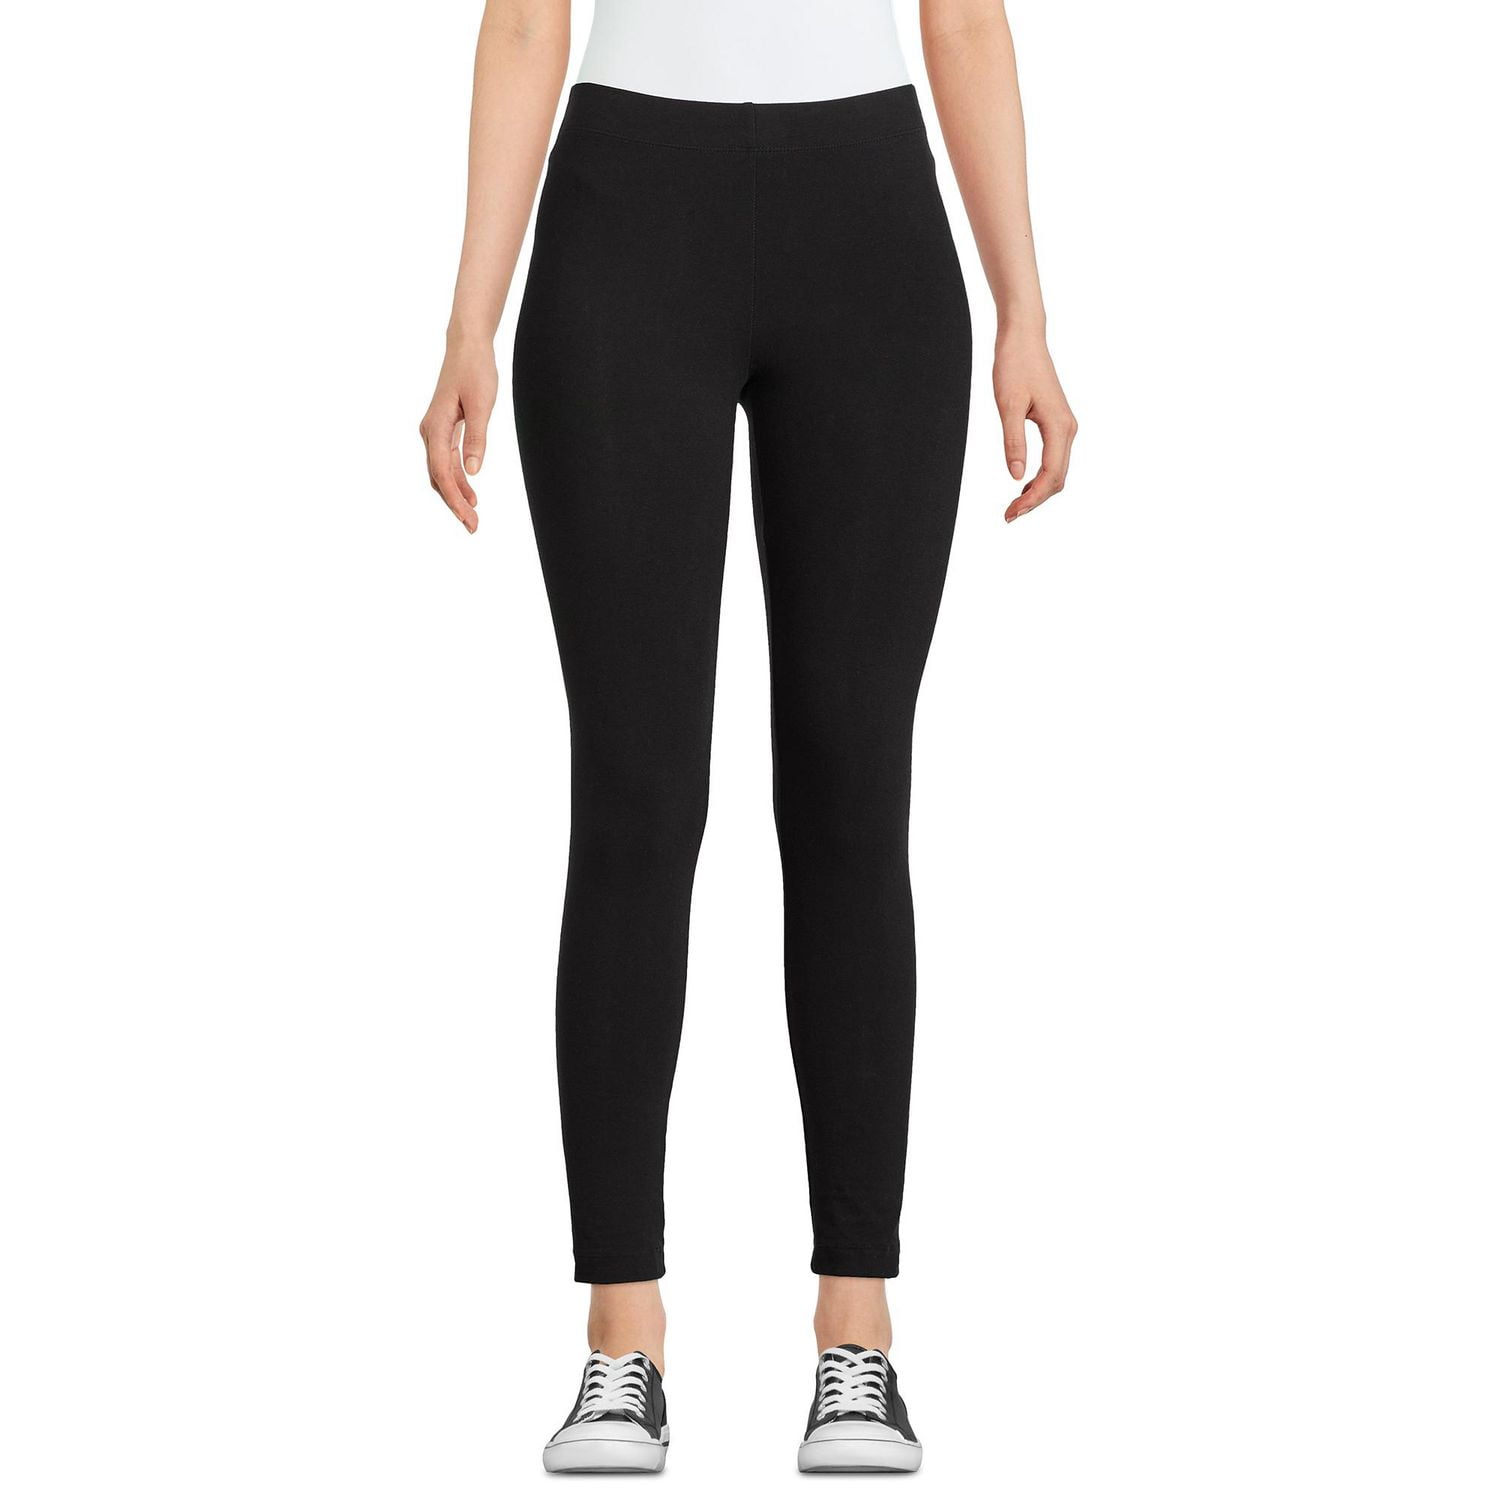 A New Day Women's High Waisted Seamless Twill Leggings Black Size L/XL.